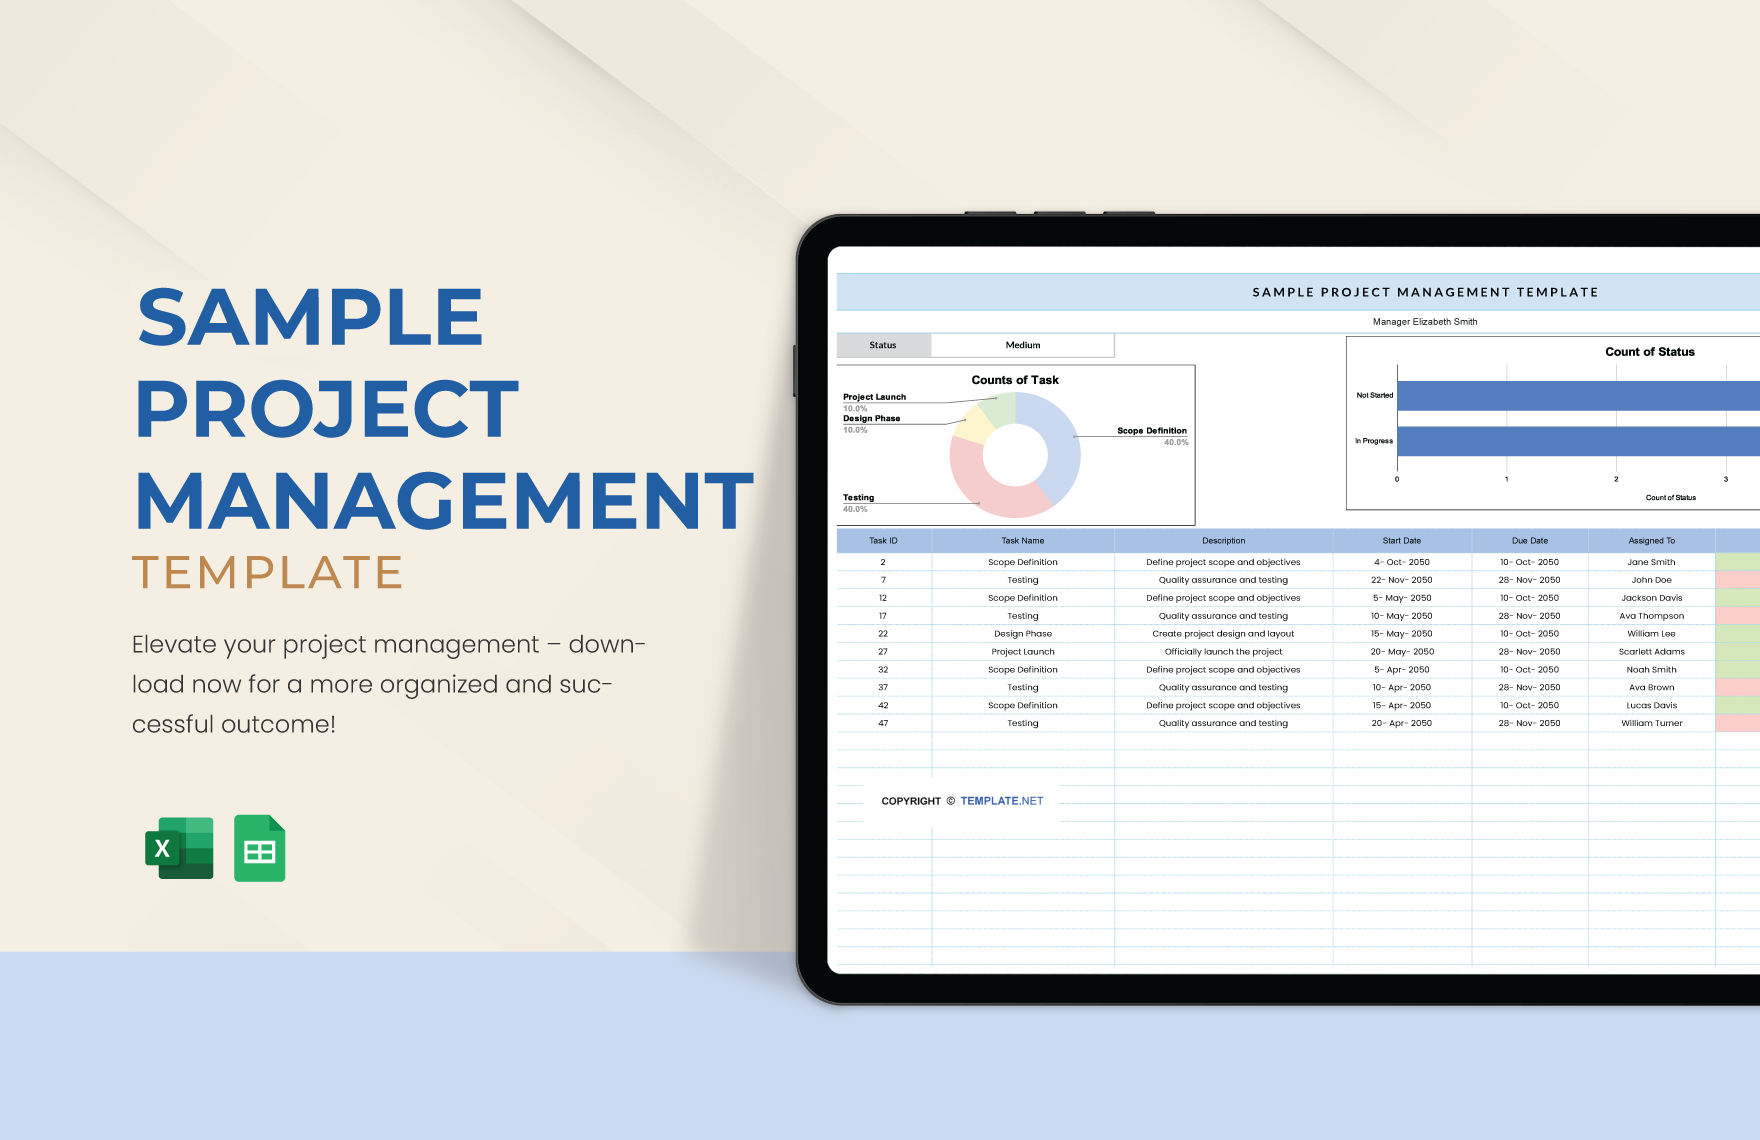 Sample Project Management Template